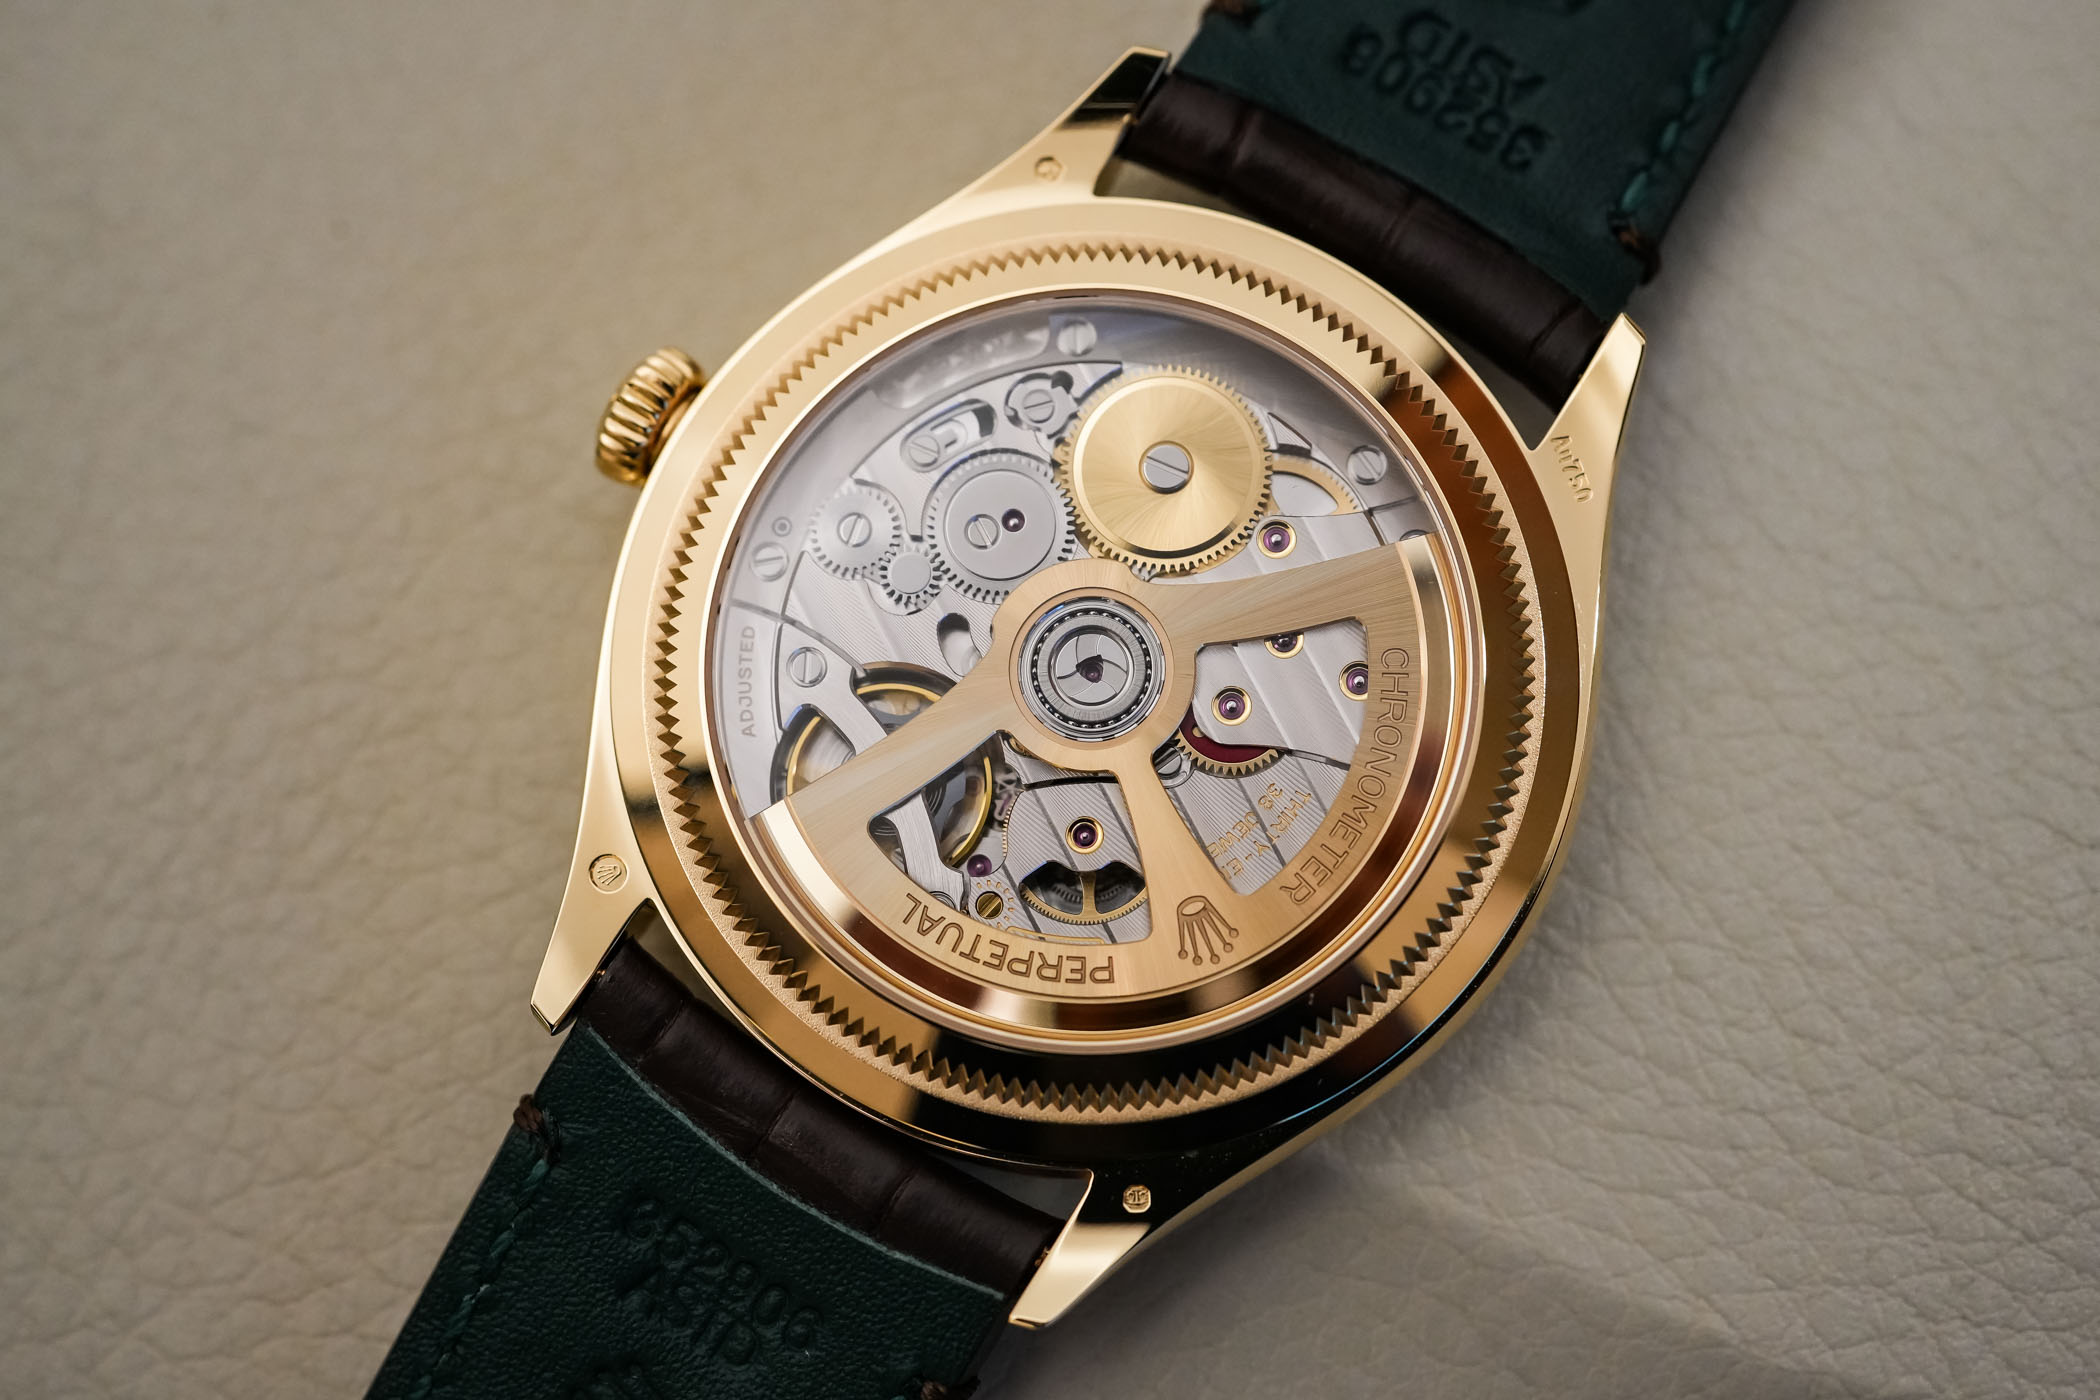 Rolex Perpetual 1908 reference 52508 Yellow Gold Review